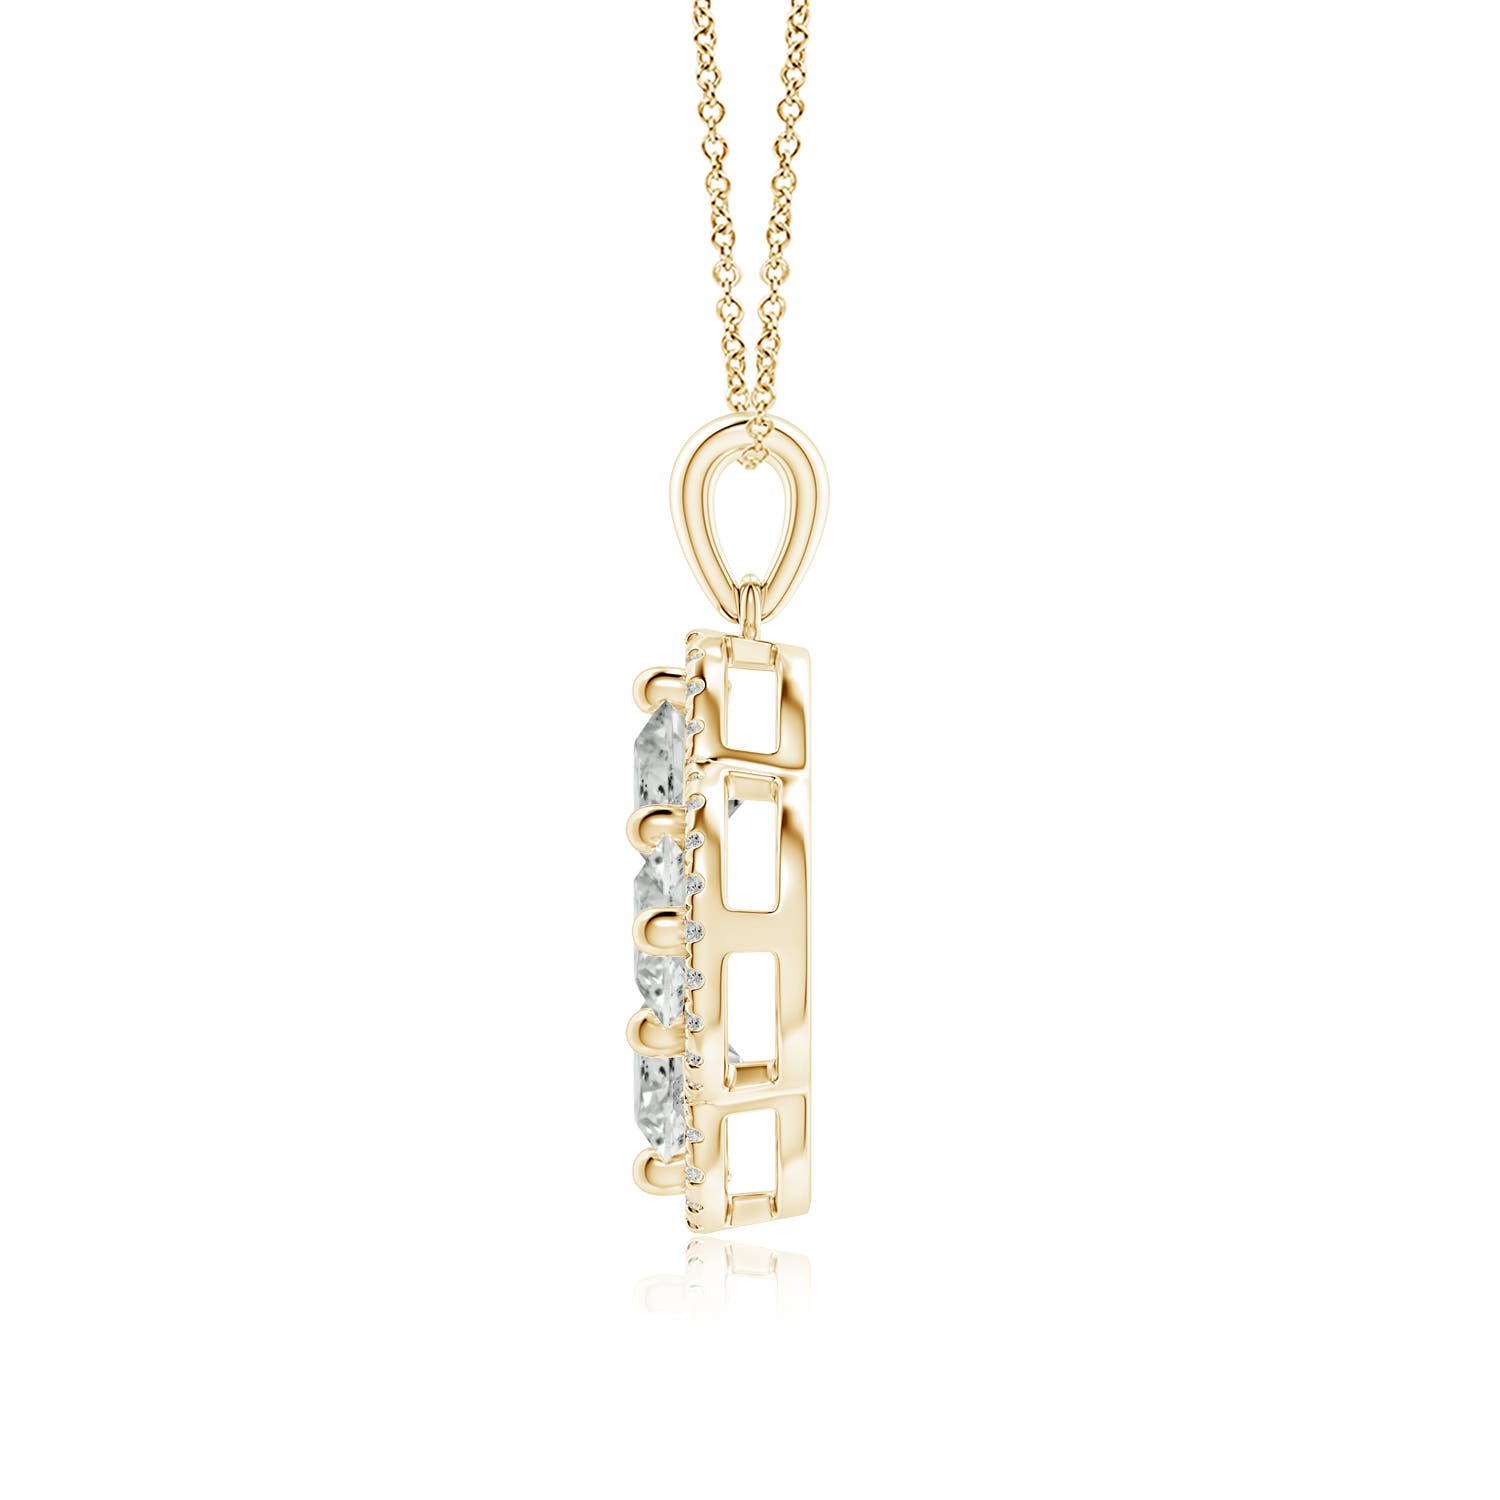 K, I3 / 2.2 CT / 18 KT Yellow Gold